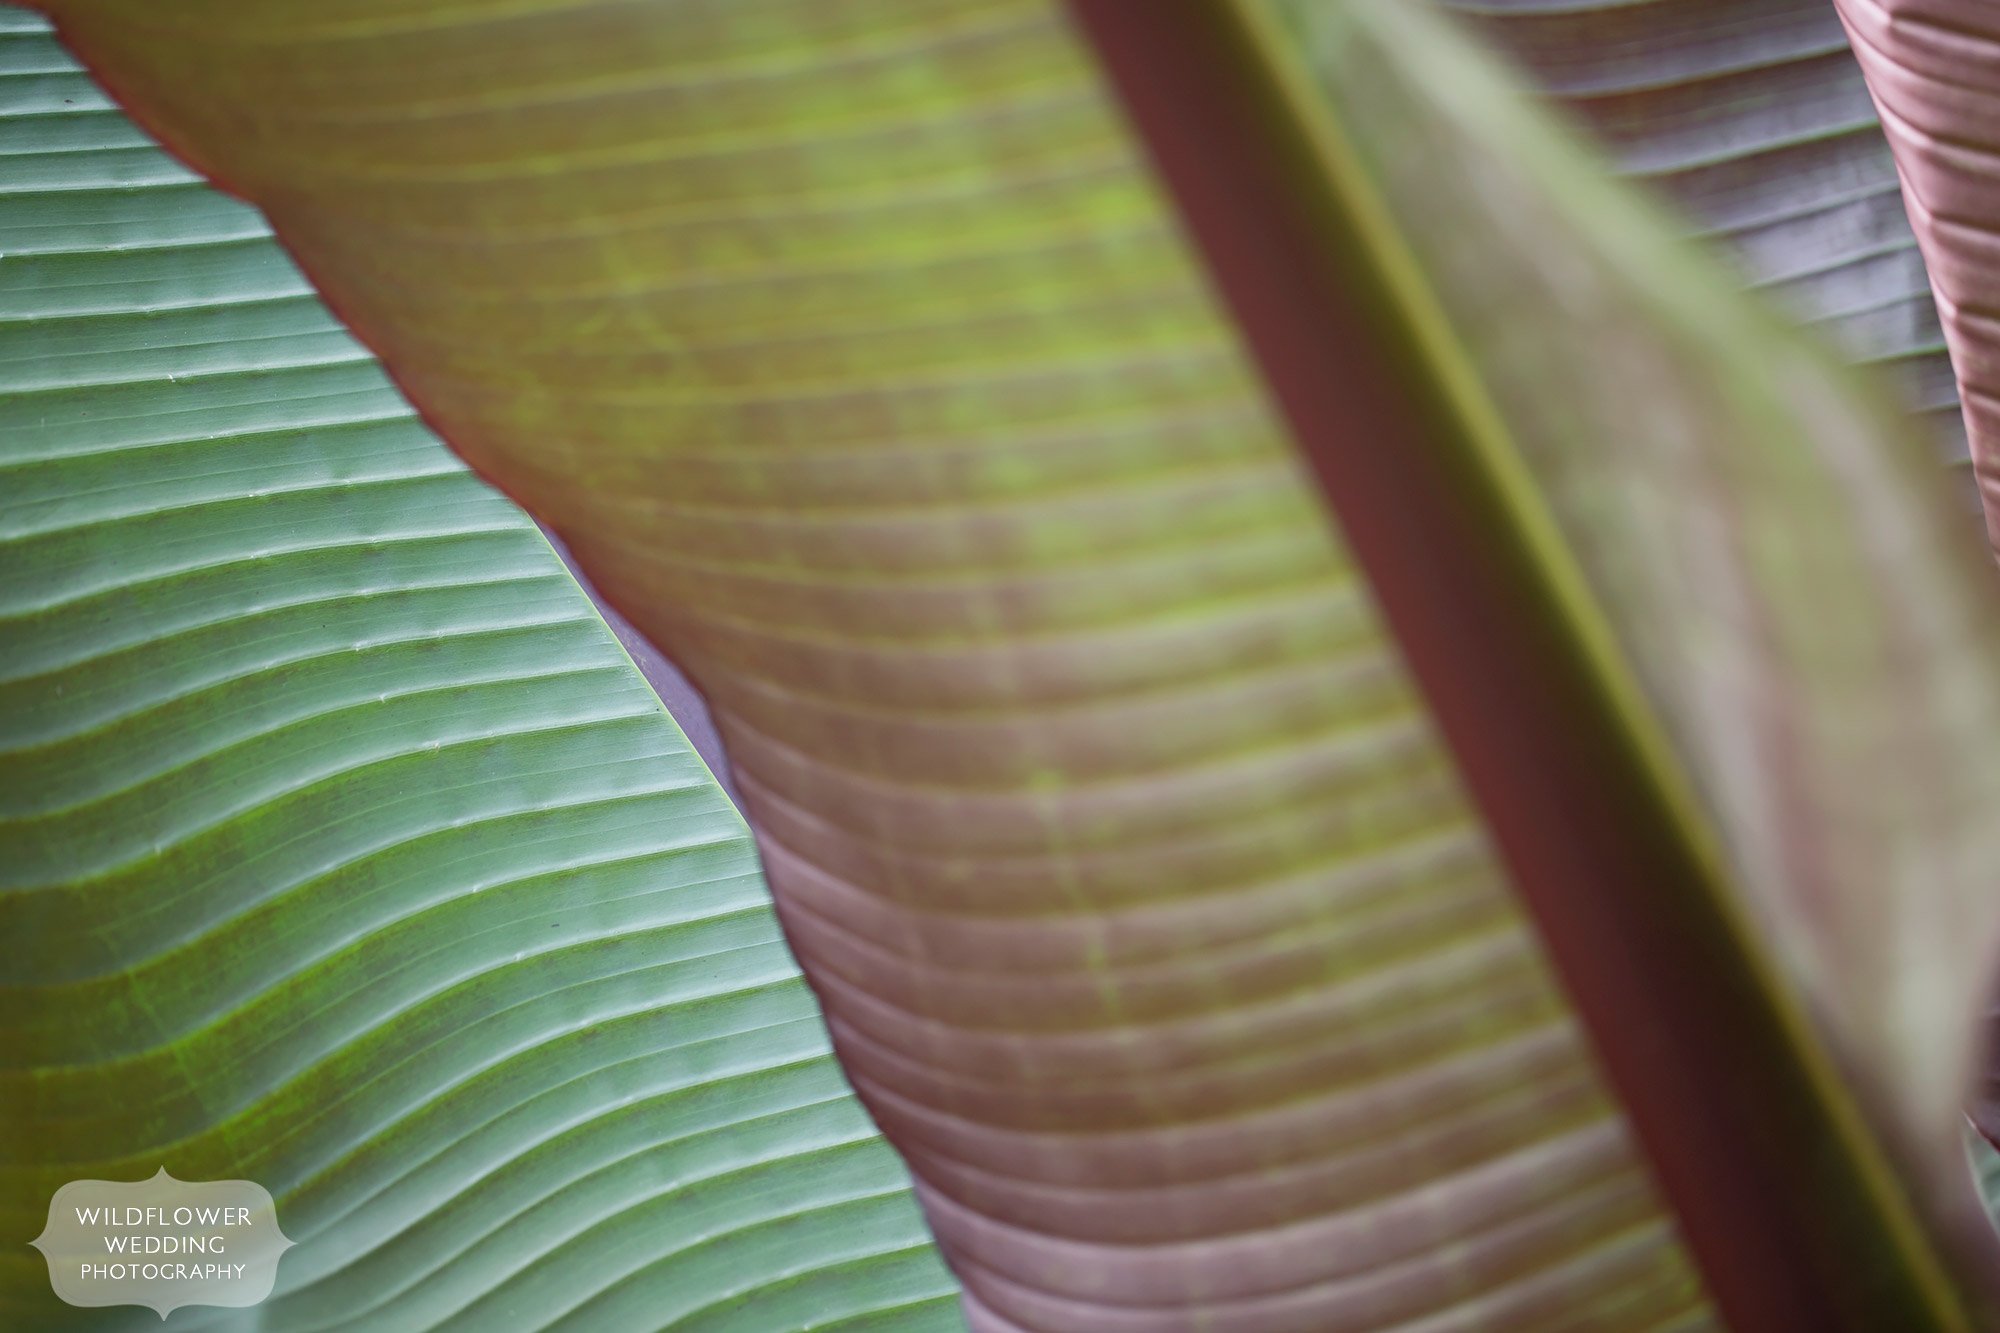 Detail of Canna leaves at Shelter Gardens during outdoor engagement photo session.